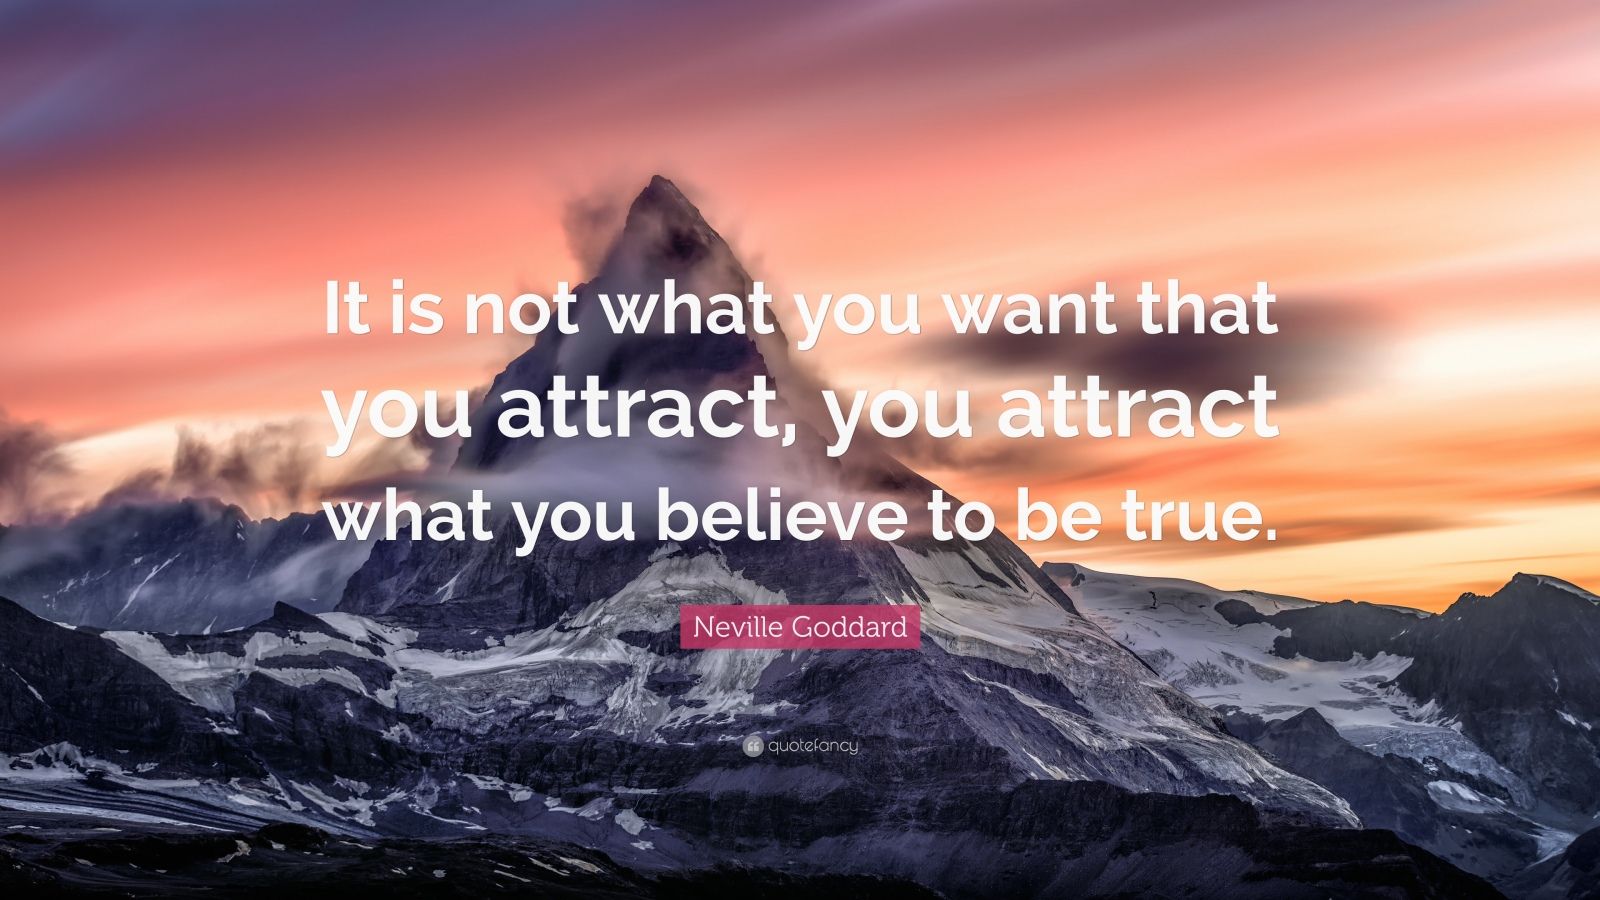 neville goddard quote: "it is not what you want that you attract